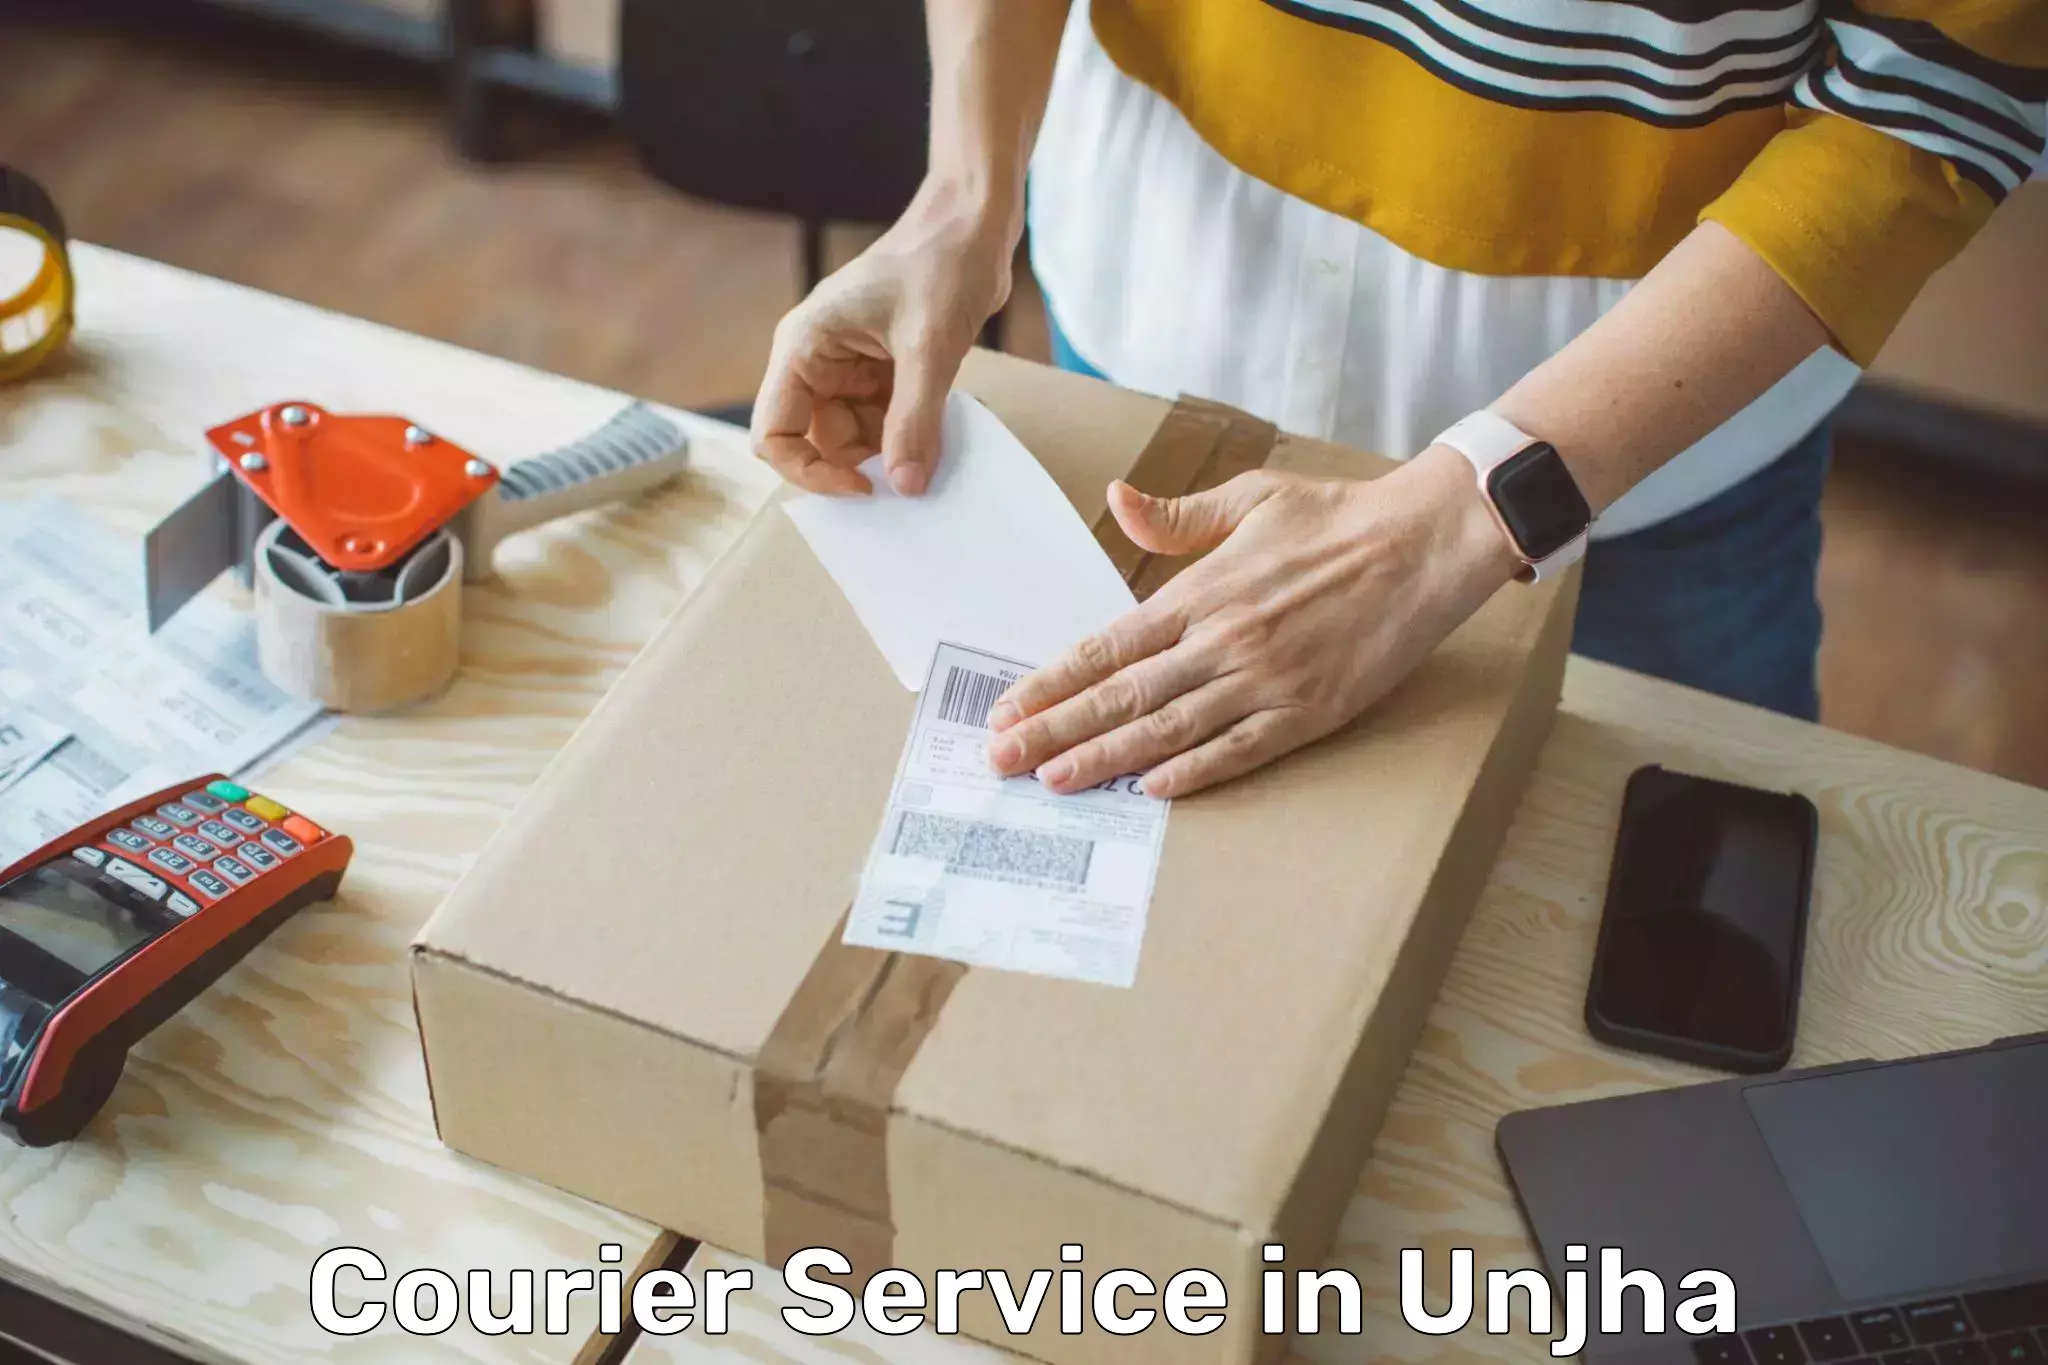 Easy access courier services in Unjha